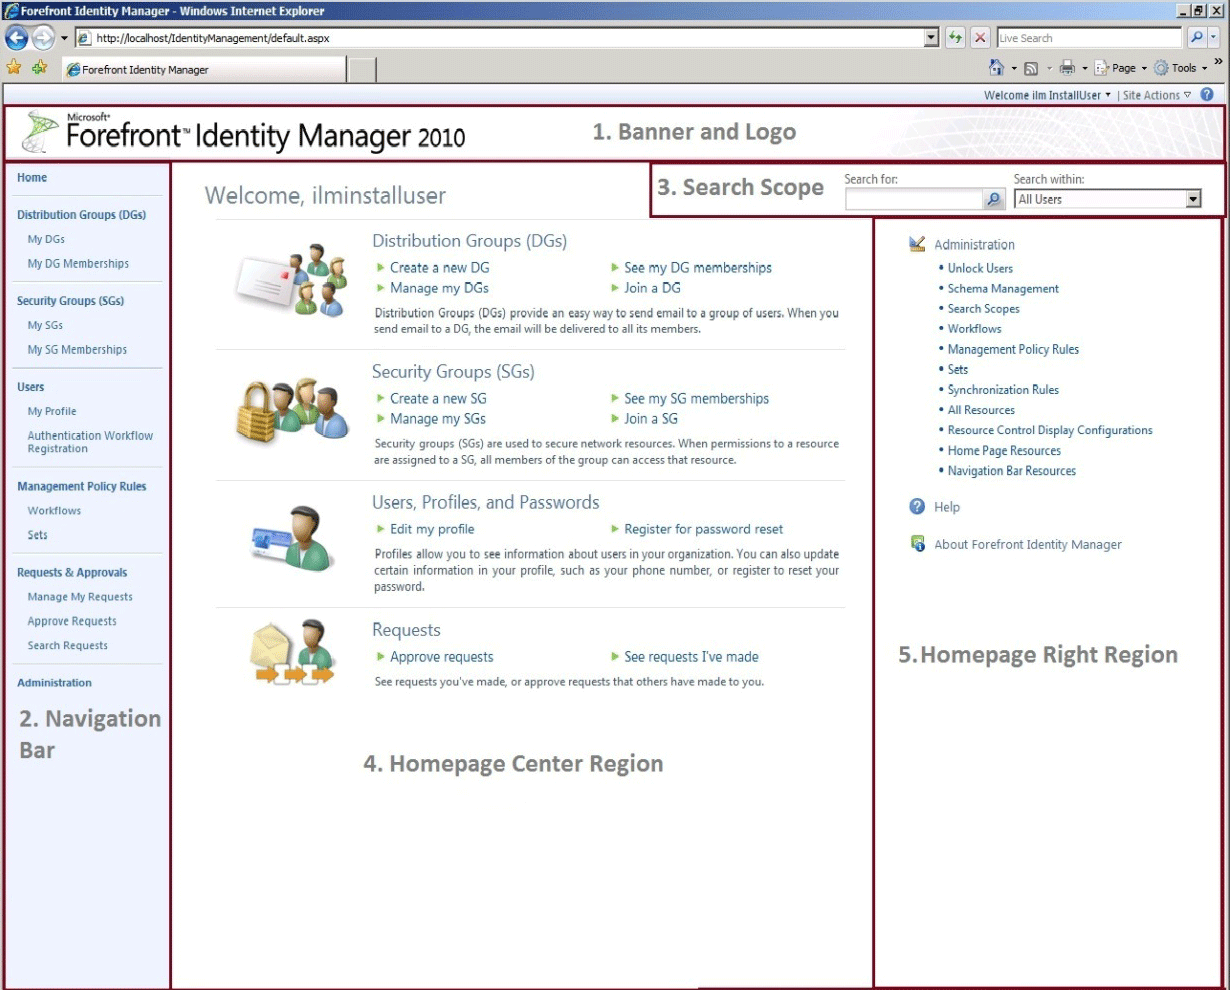 Sections of the FIM Portal